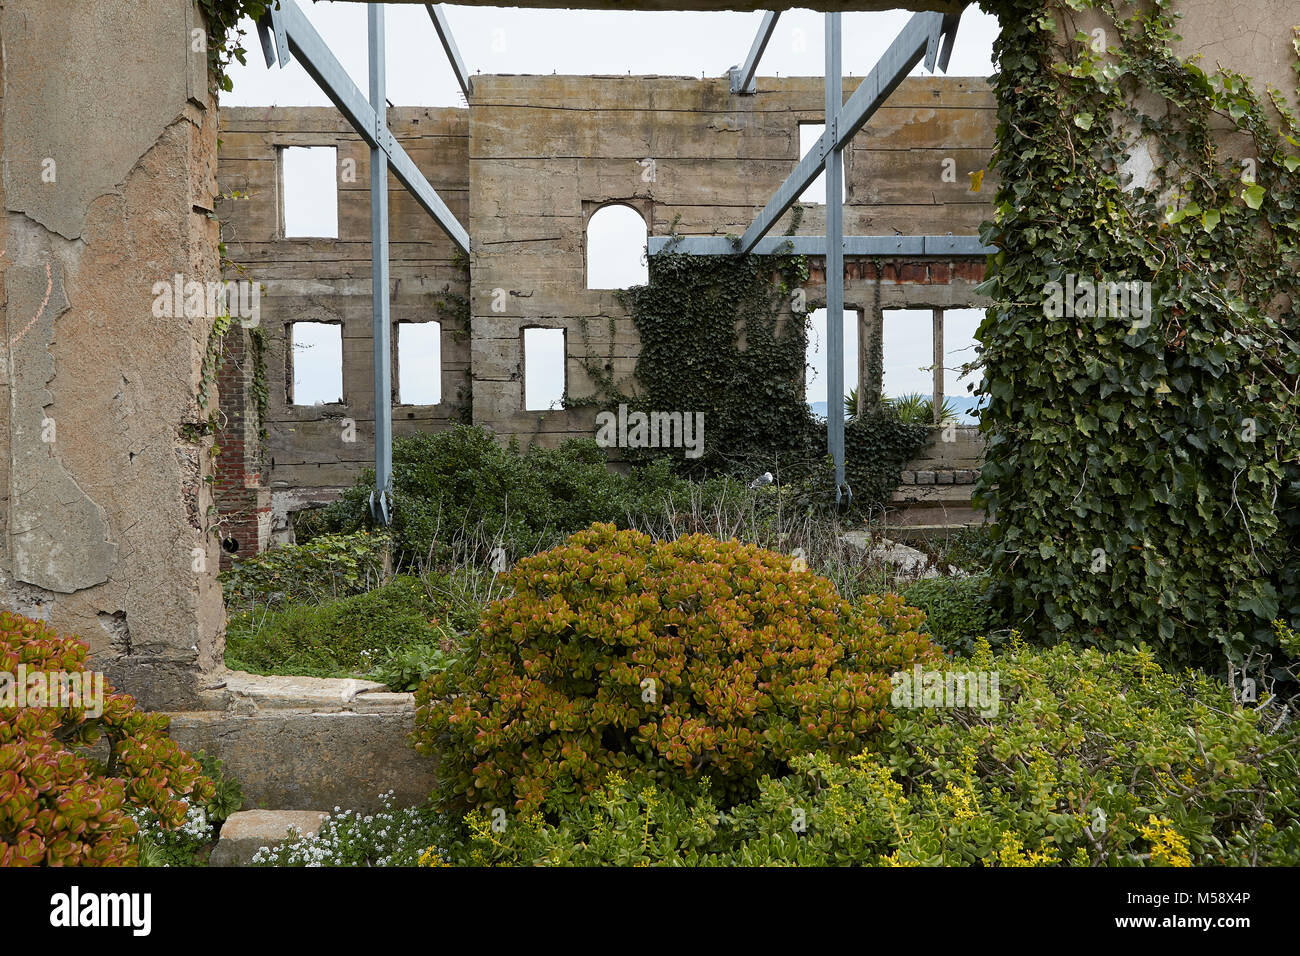 The Abandoned And Overgrown Post Exchange / Officers Club At Alcatraz, San Francisco, California. Stock Photo